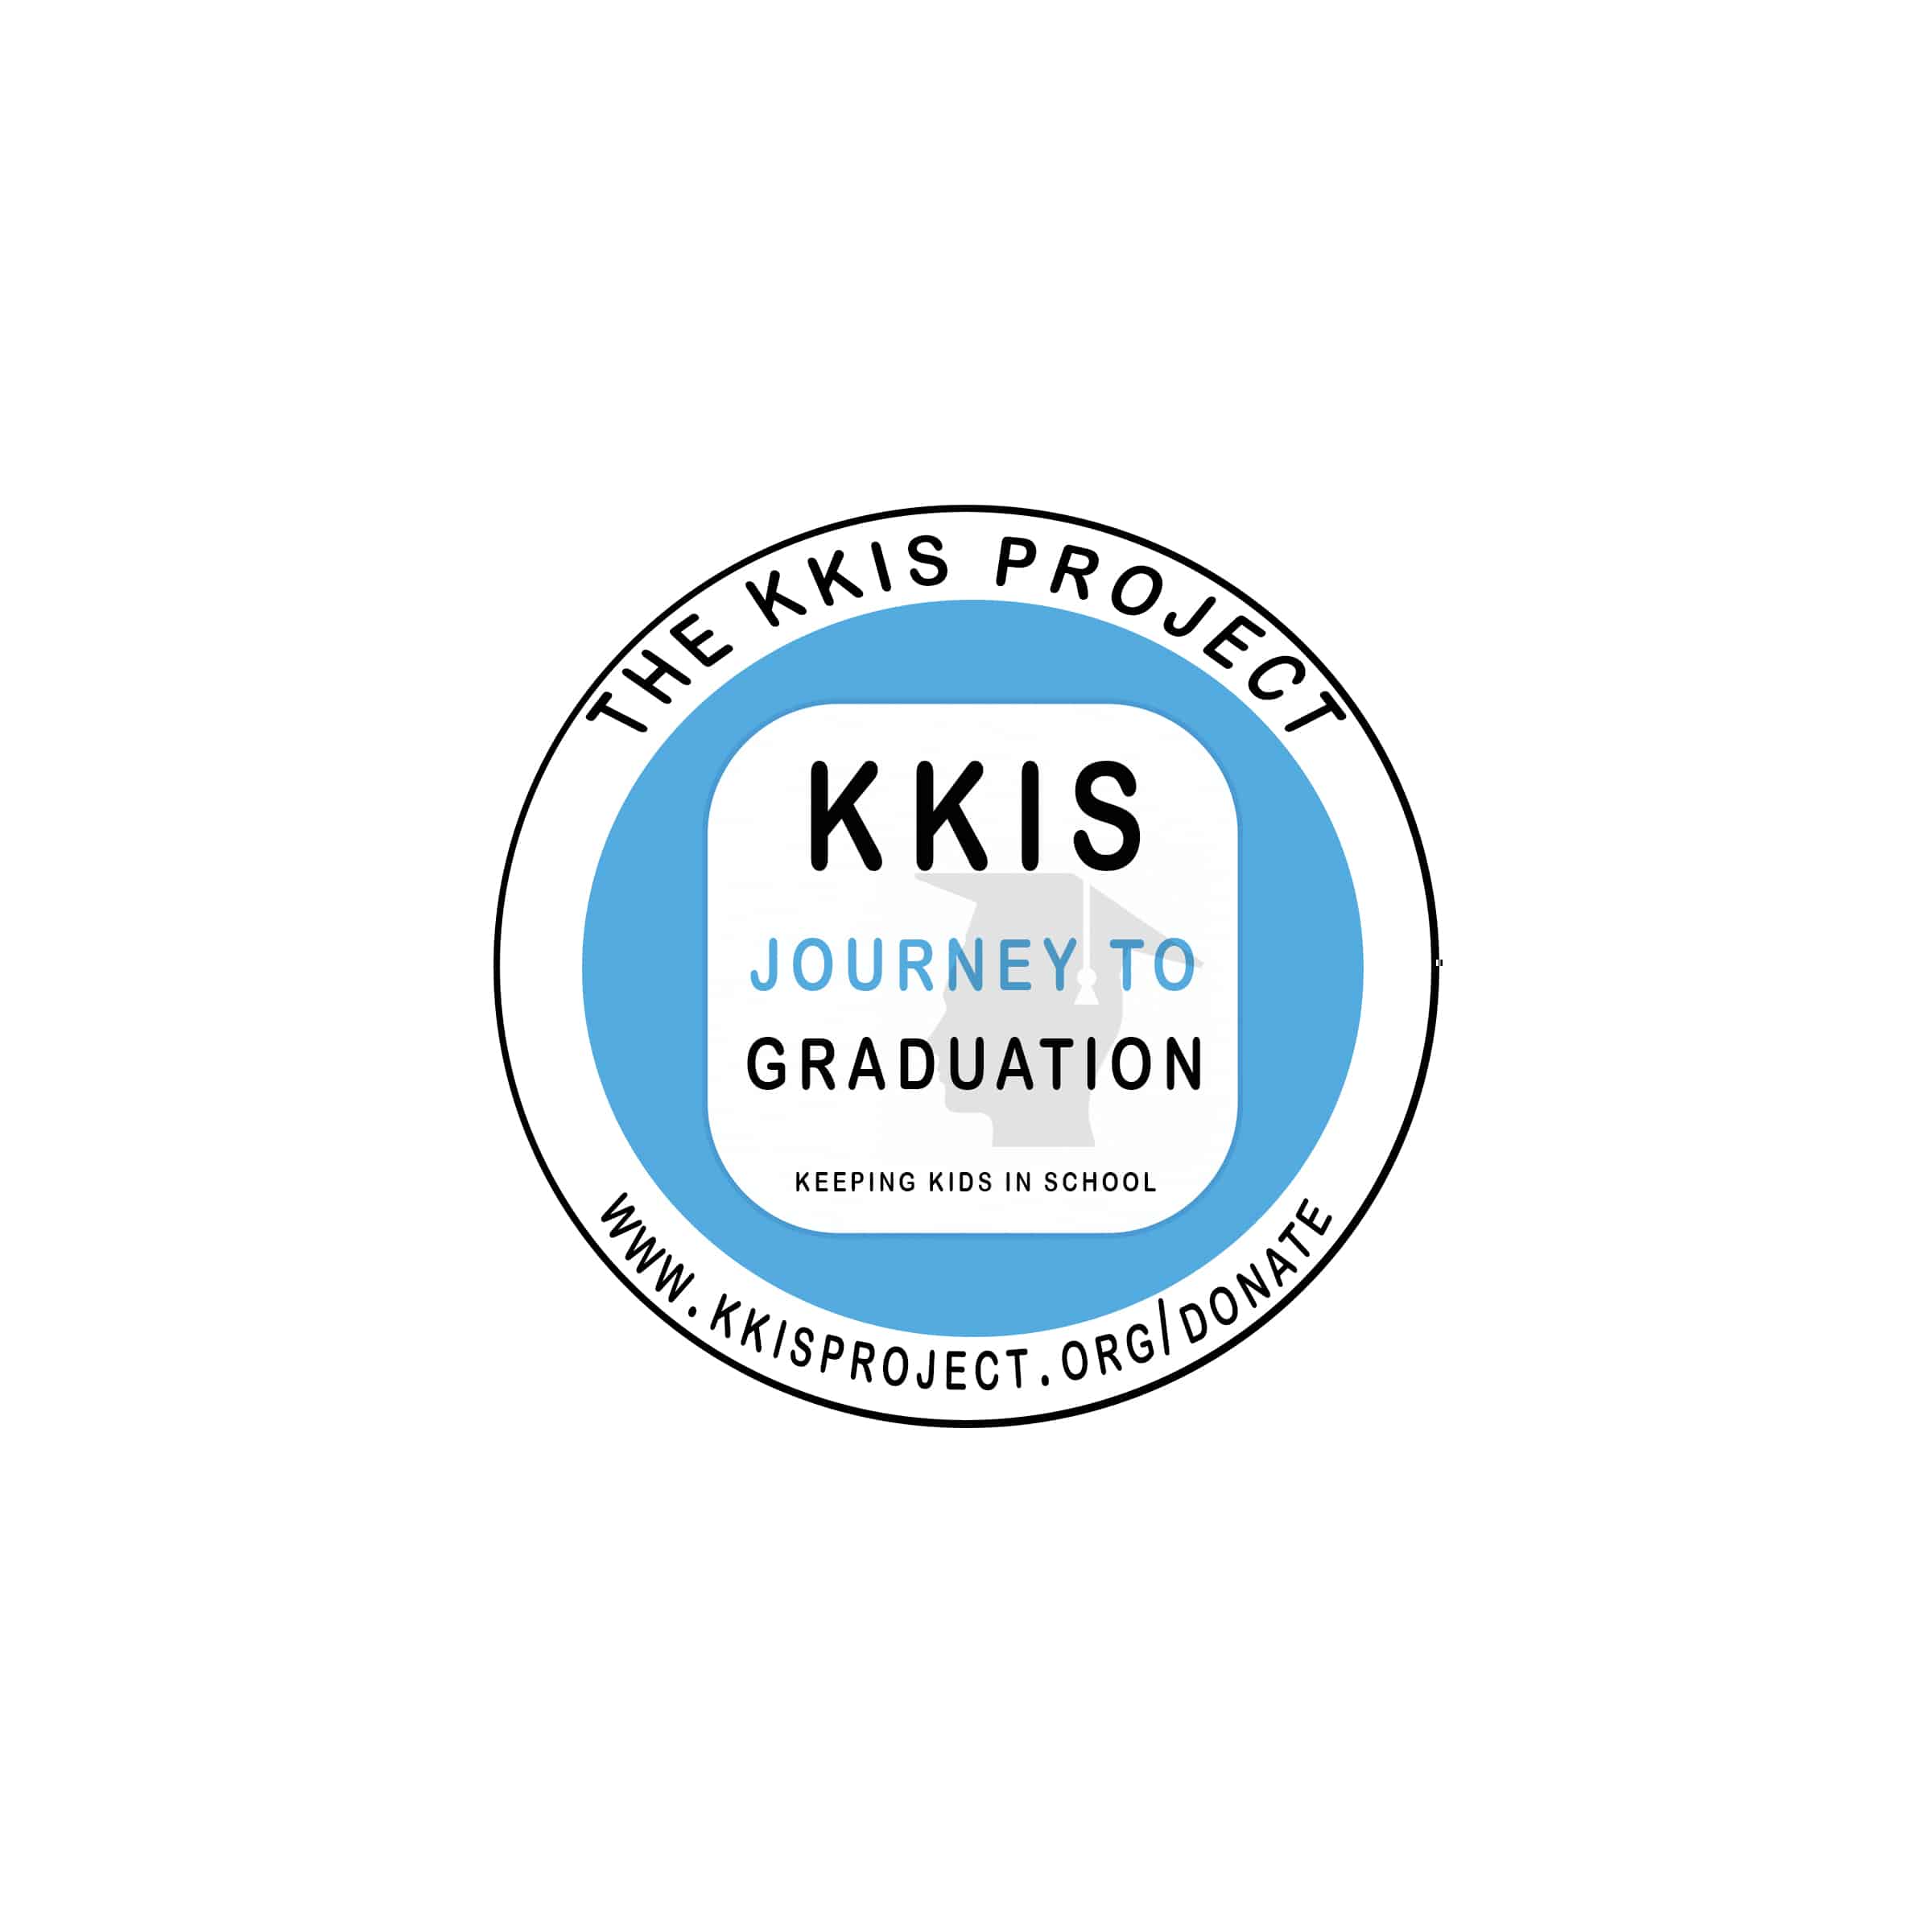 4 KKIS Student Stories About High School Graduation That We Love